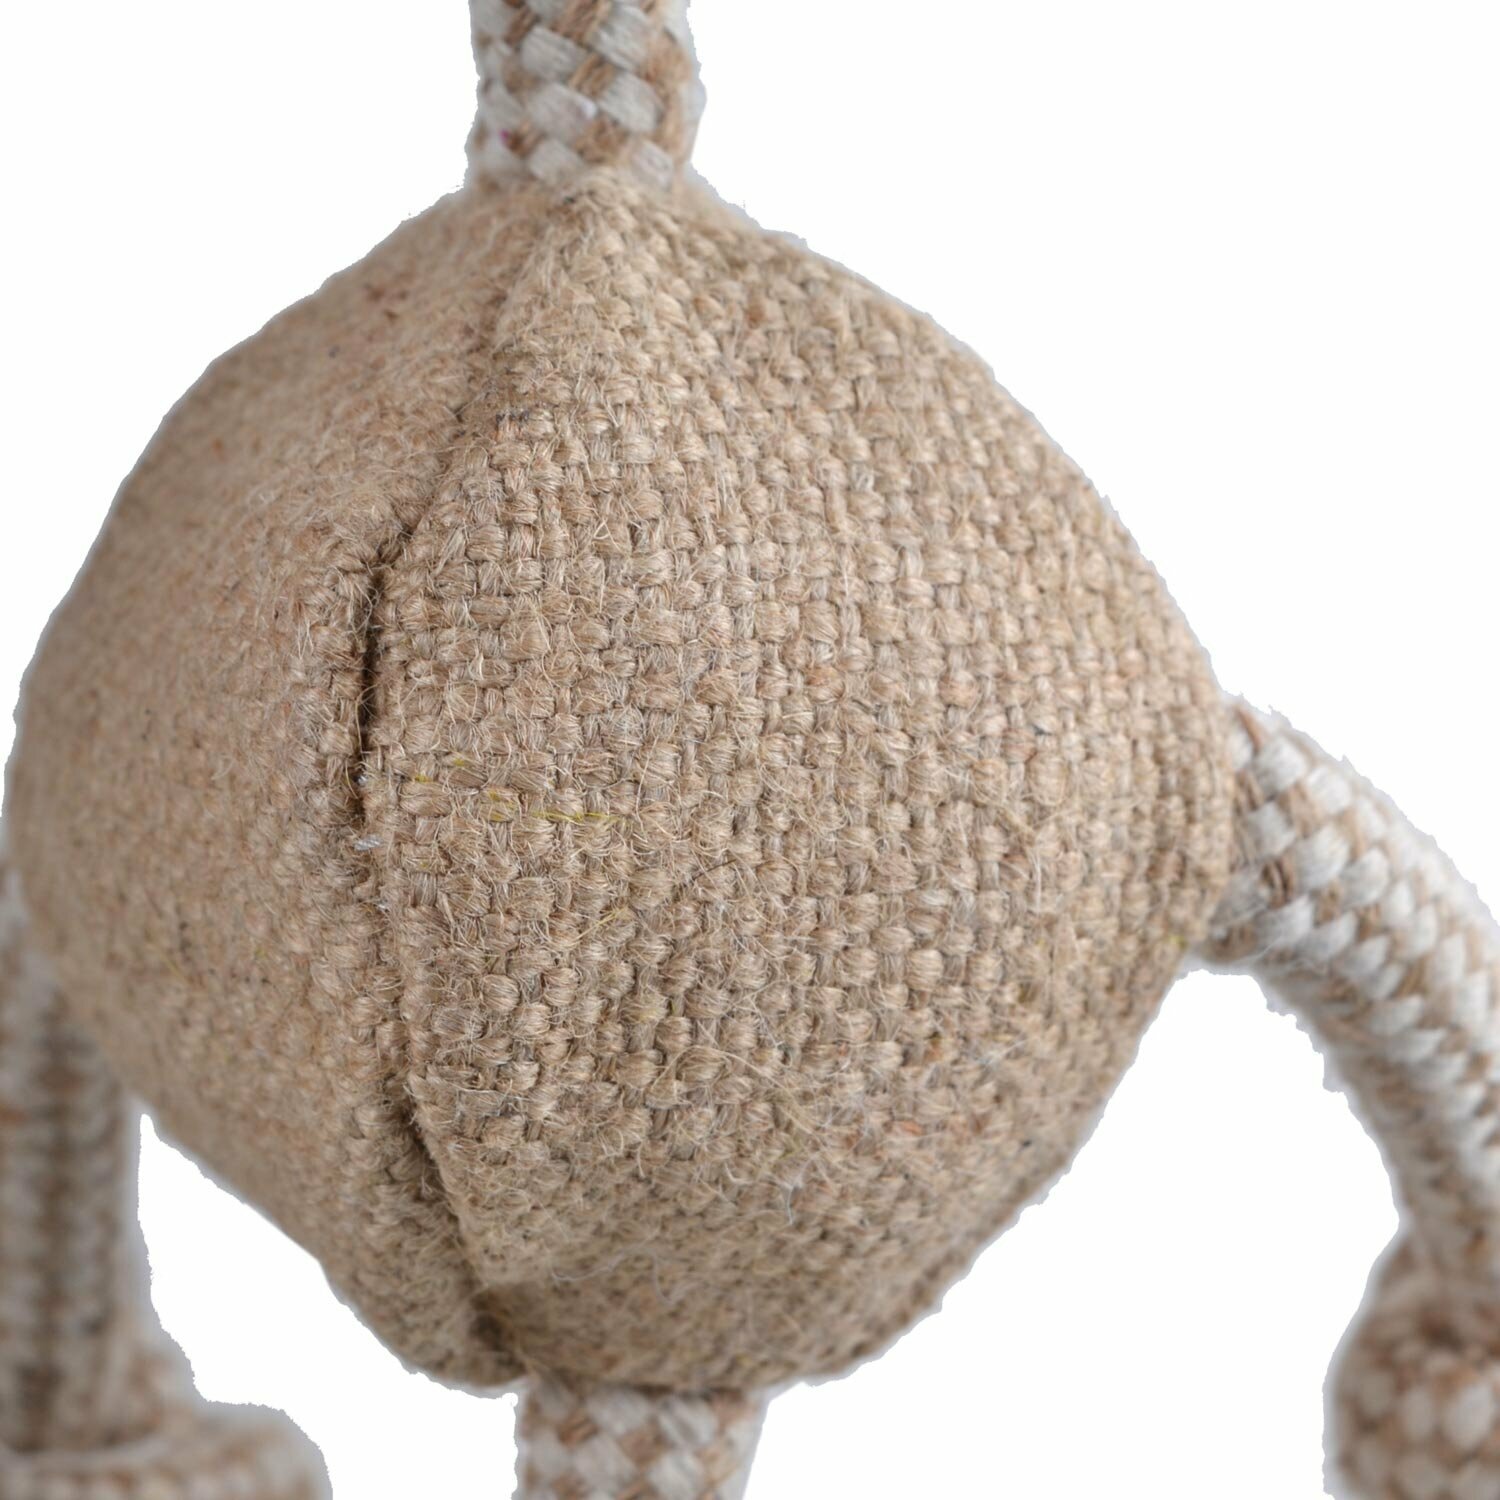 Dog toys made of jute, cotton and cowhide leather